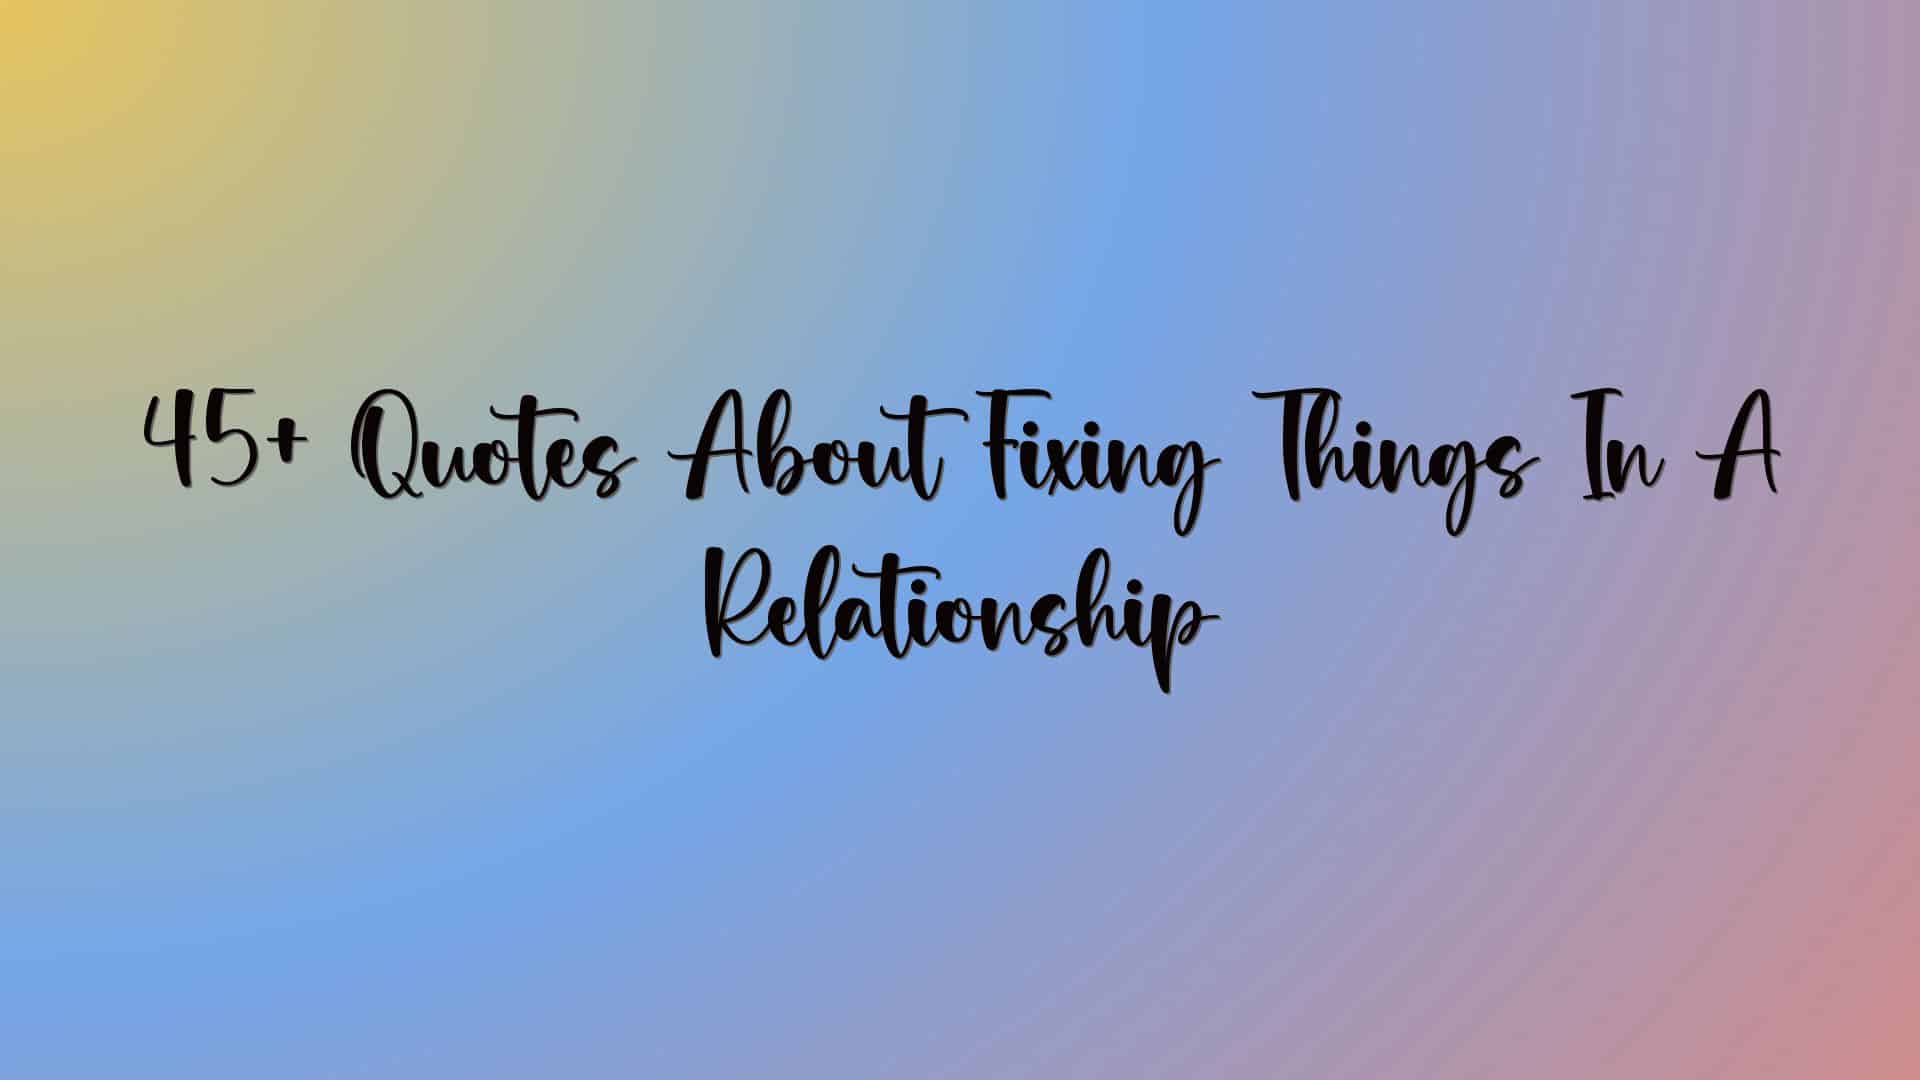 45+ Quotes About Fixing Things In A Relationship